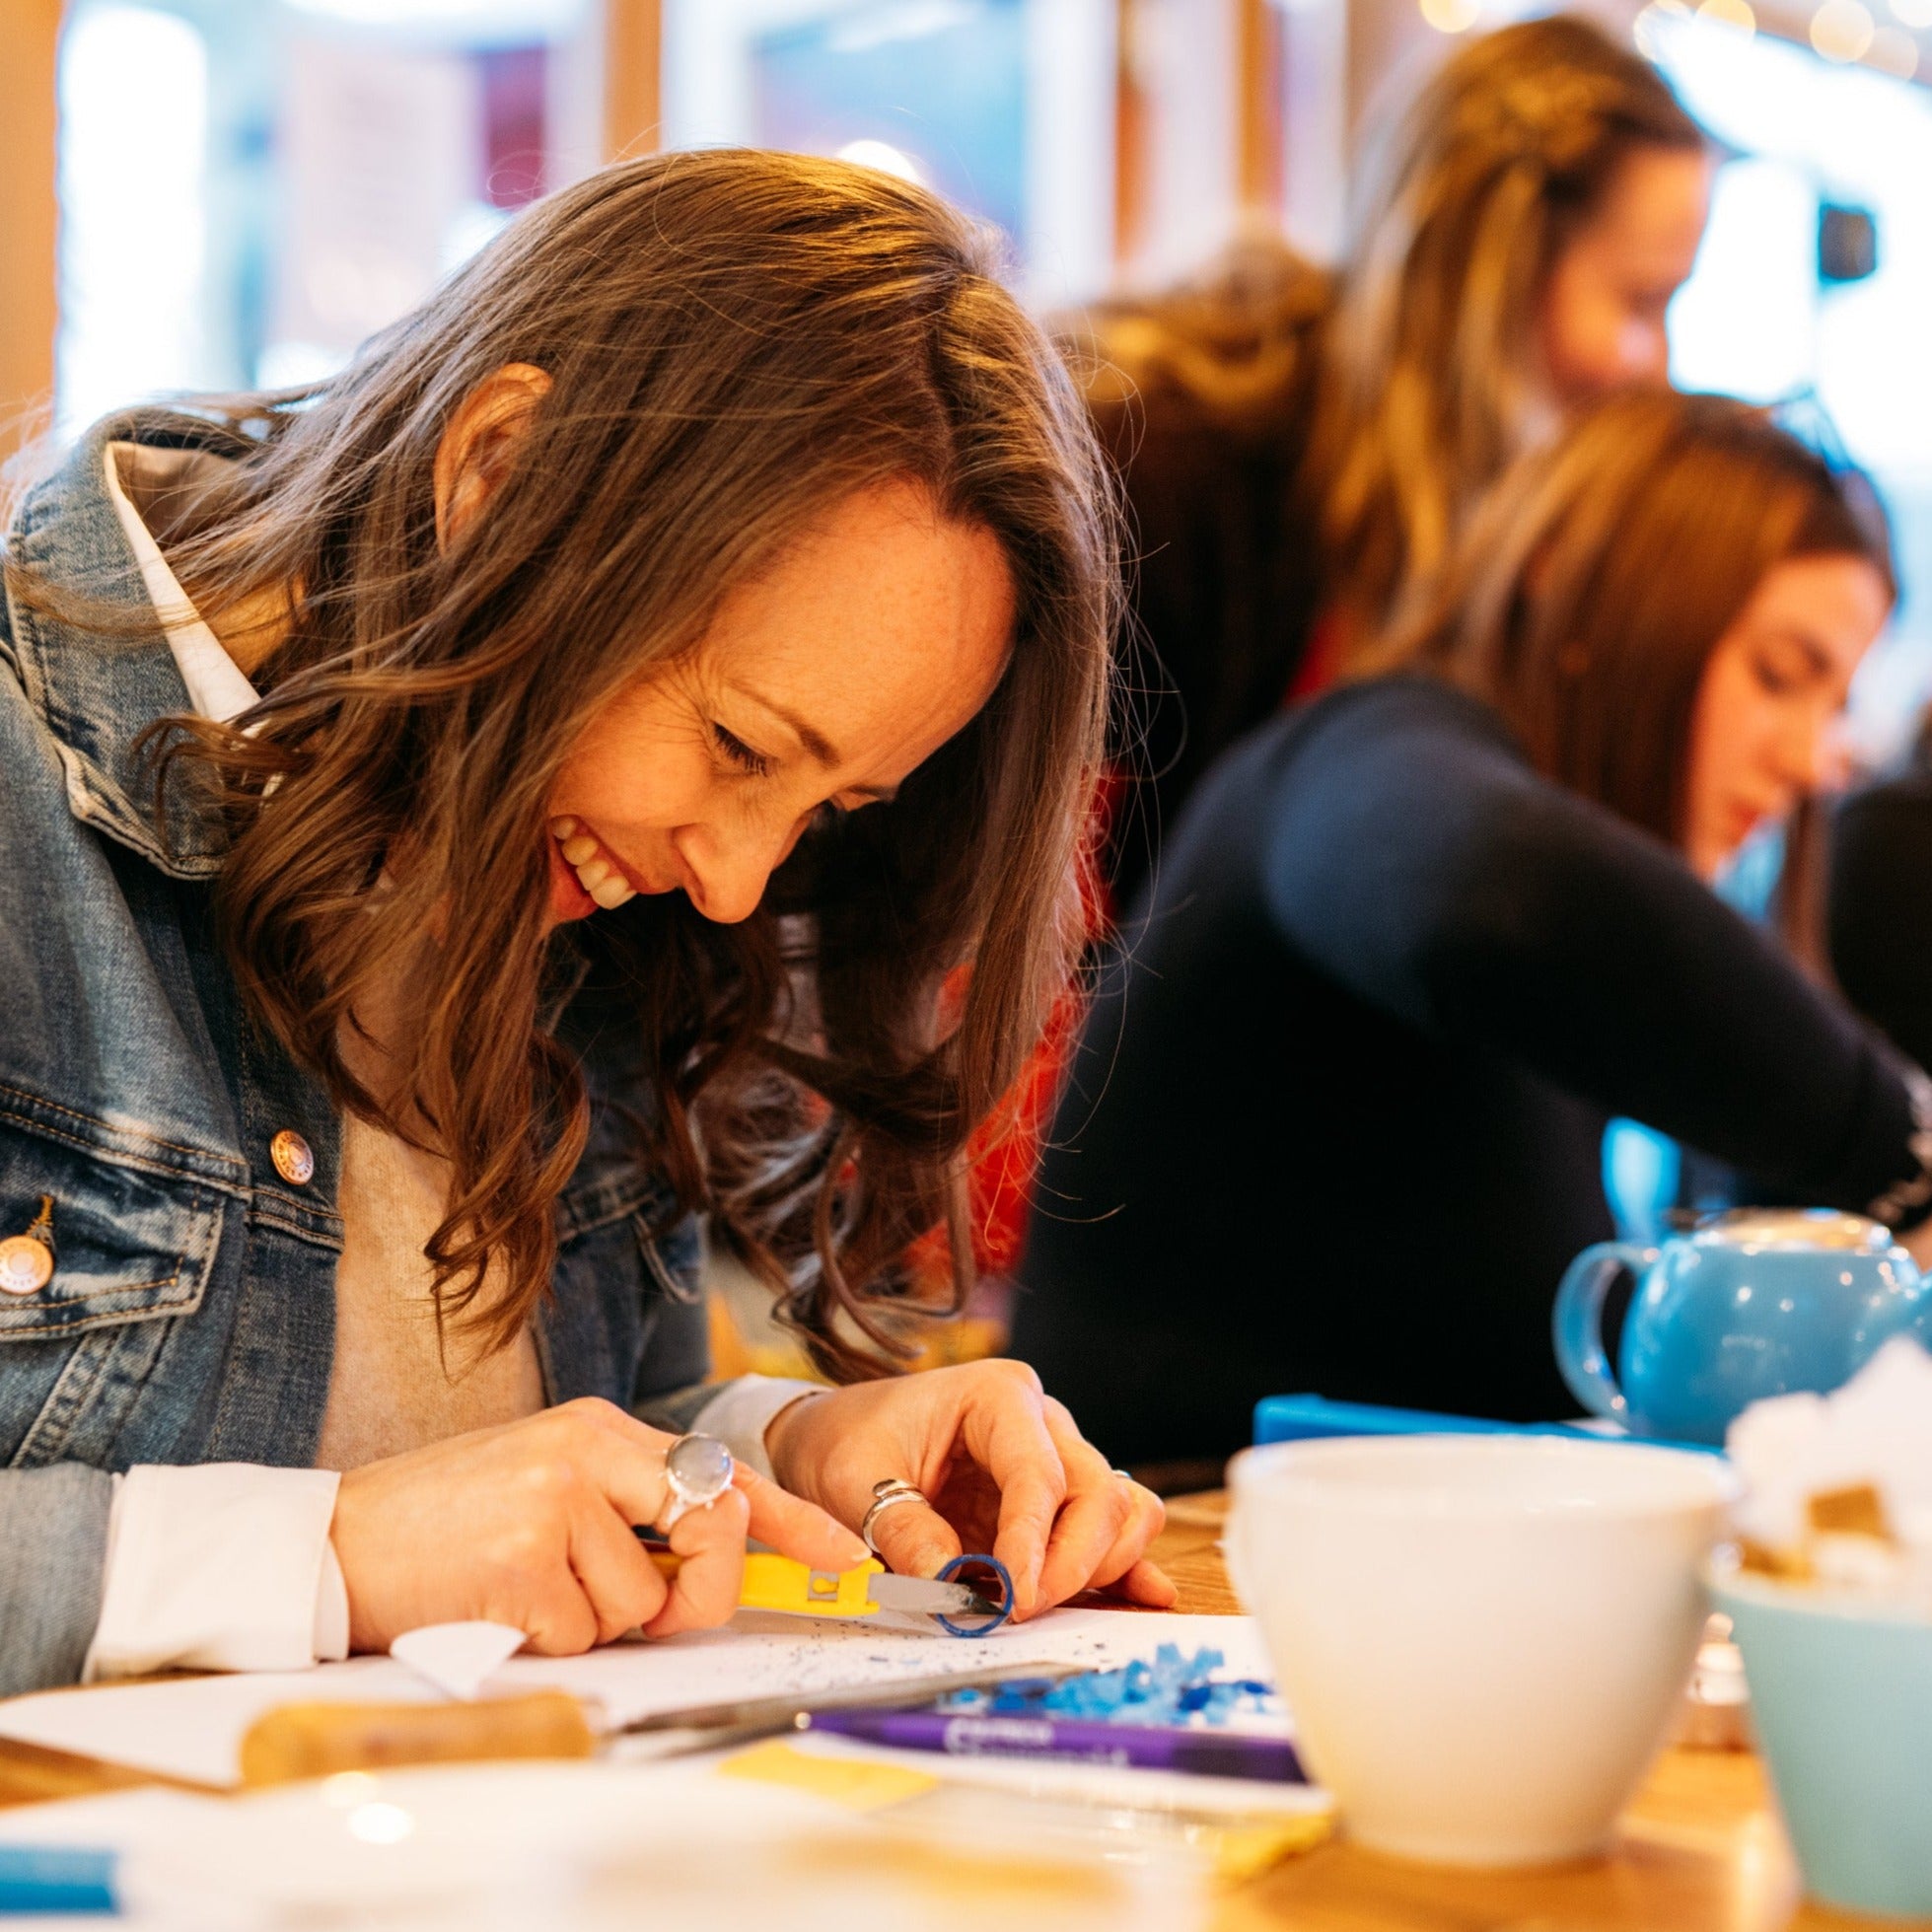 In this workshop you will learn how to create your own bespoke silver ring through the art of lost wax casting. Explore mindfulness through creativity in a safe space where anything is possible.